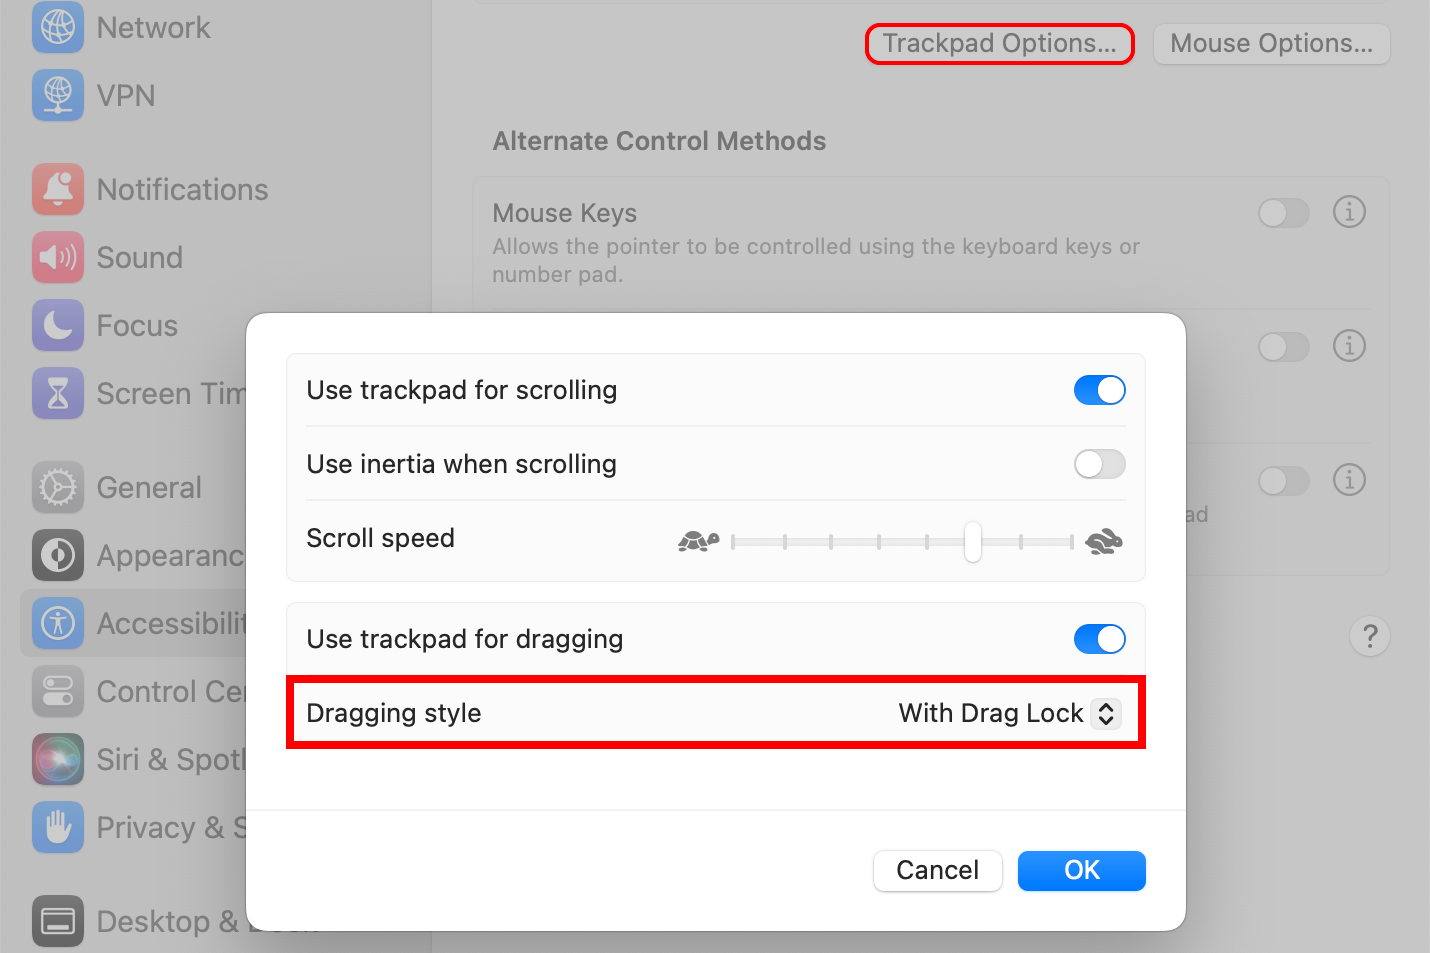 macOS System Settings with the Drag Lock turned on in the trackpad options.